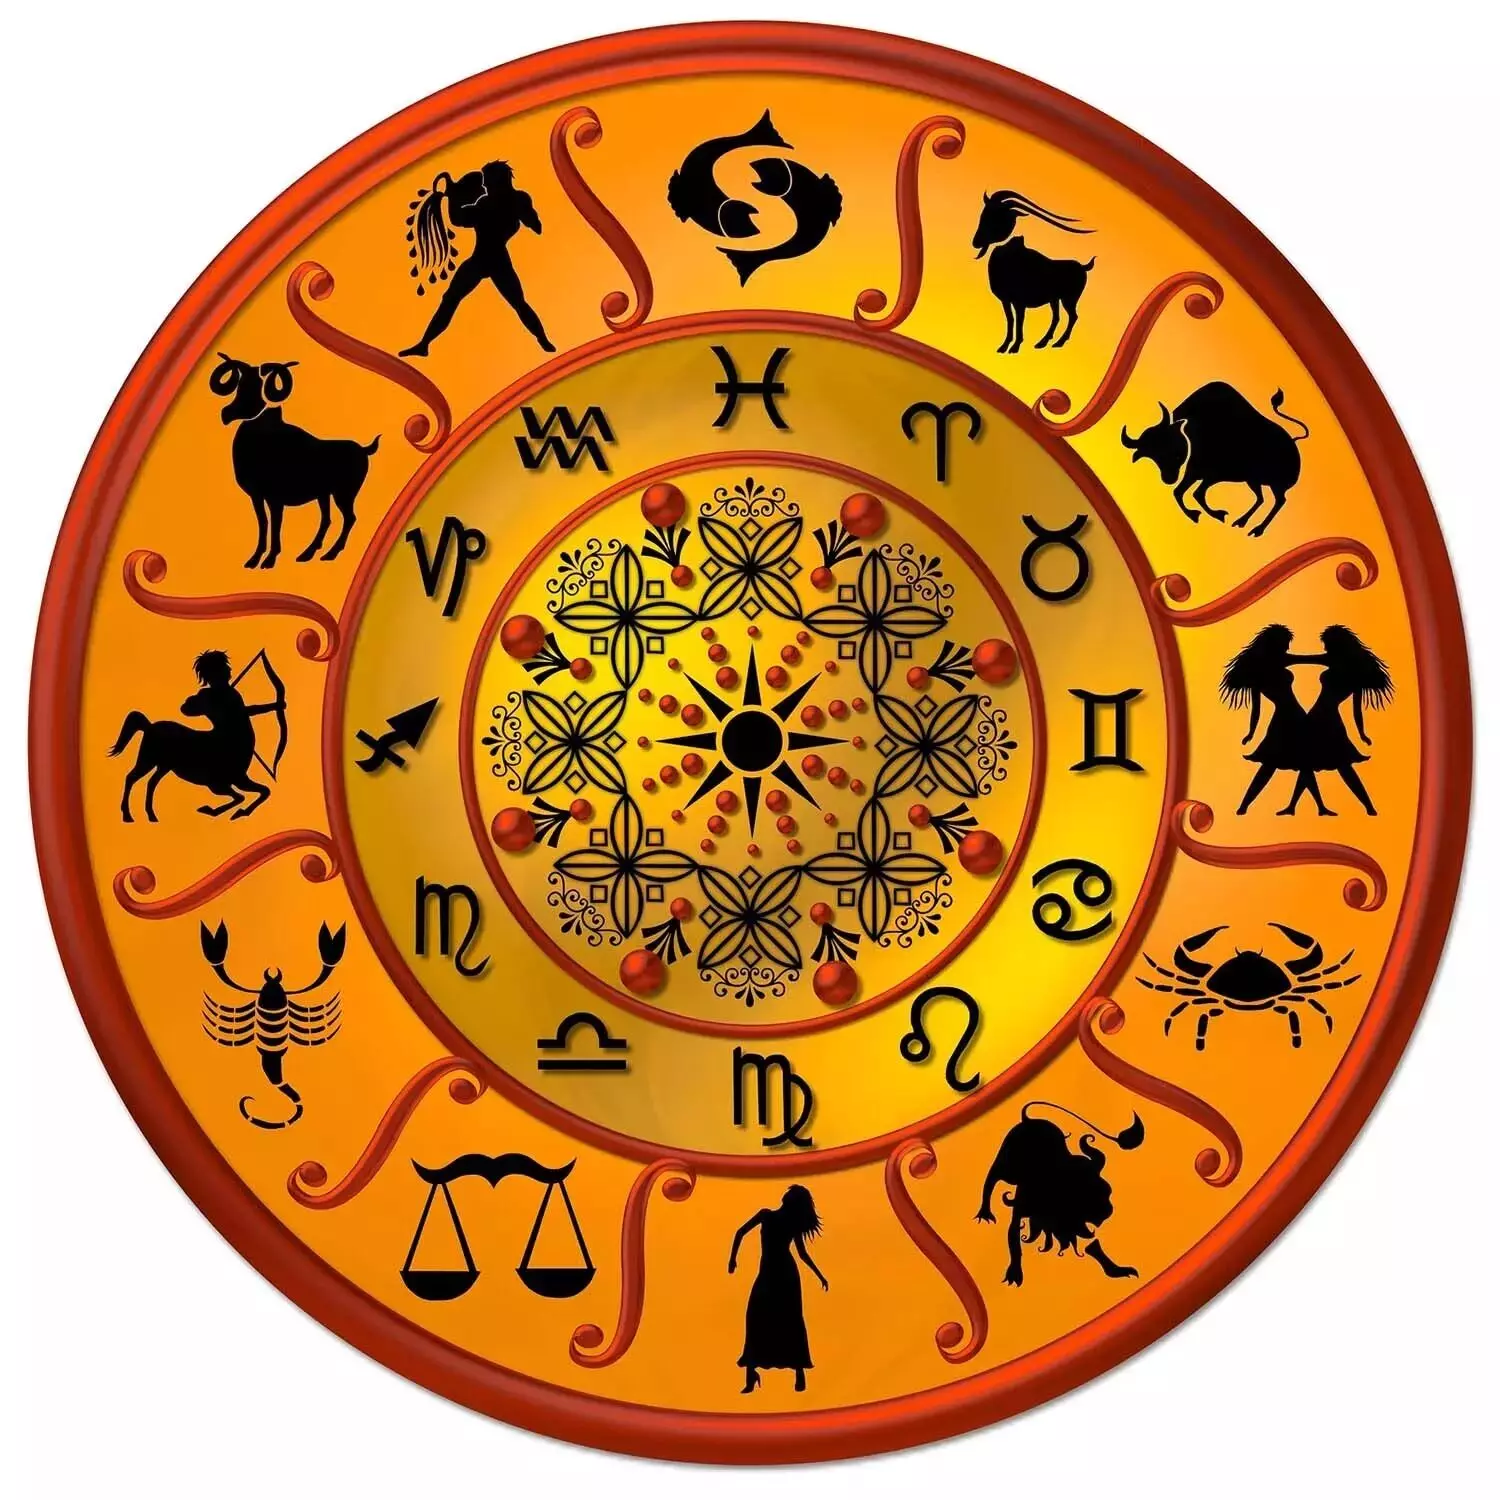 08 September  – Know your todays horoscope